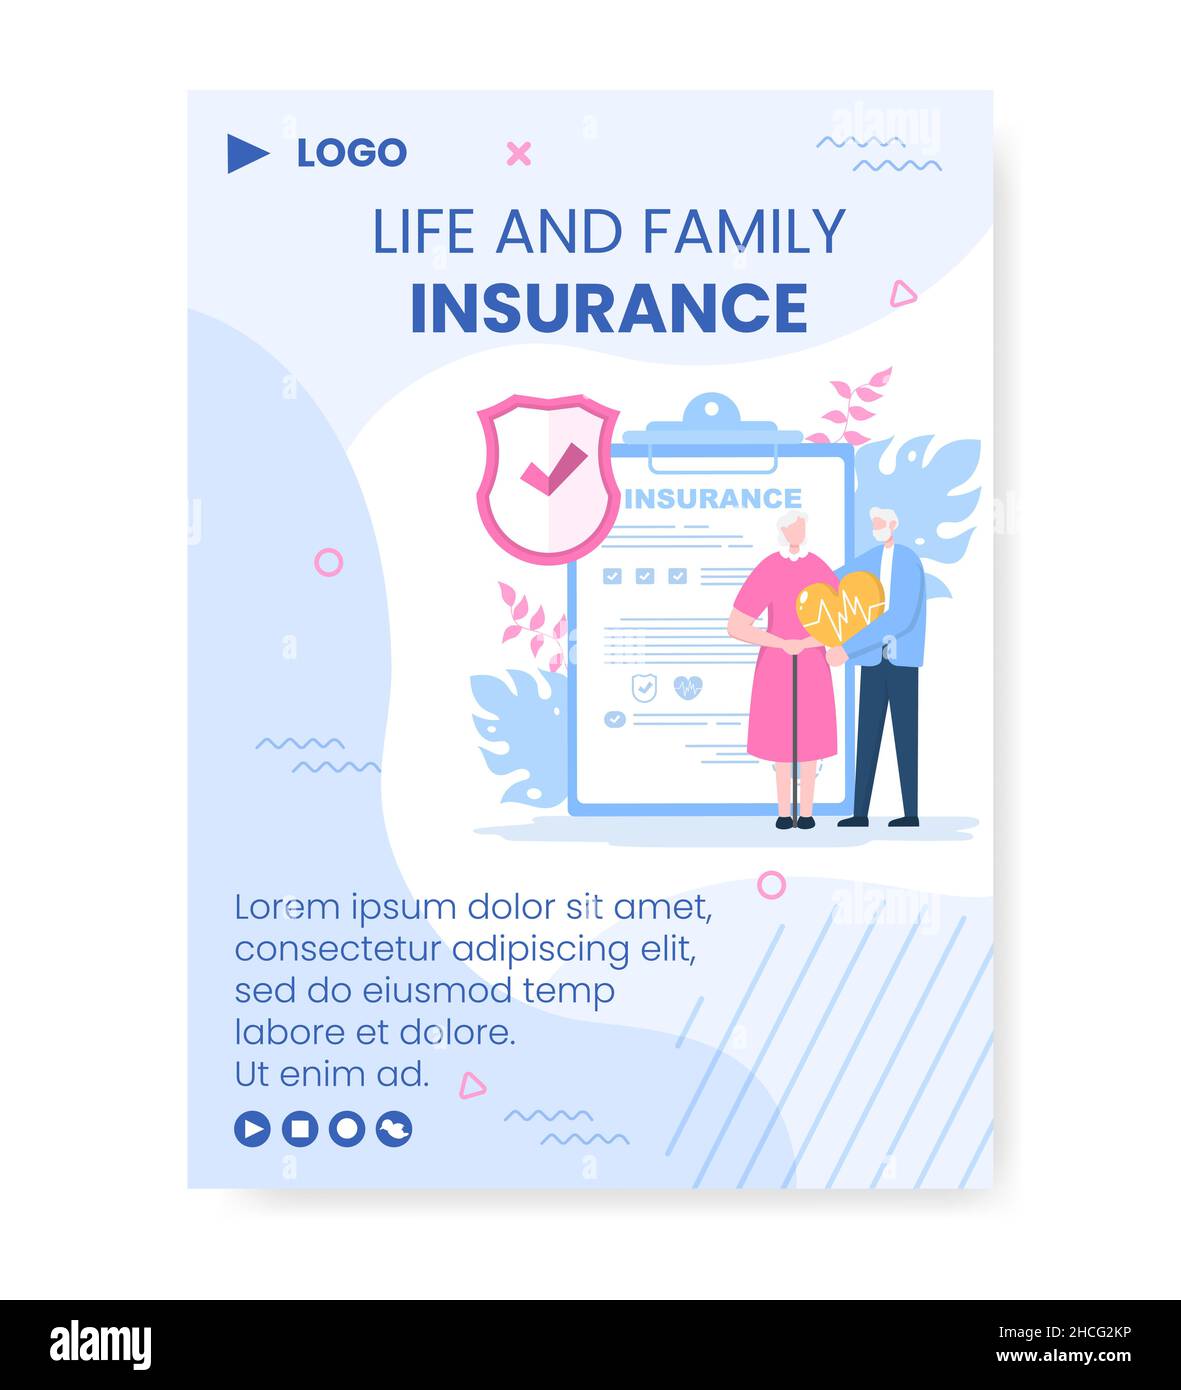 Family Life Insurance Poster Template Flat Design Editable Illustration Square background to Social Media or Greeting Card Illustrazione Vettoriale